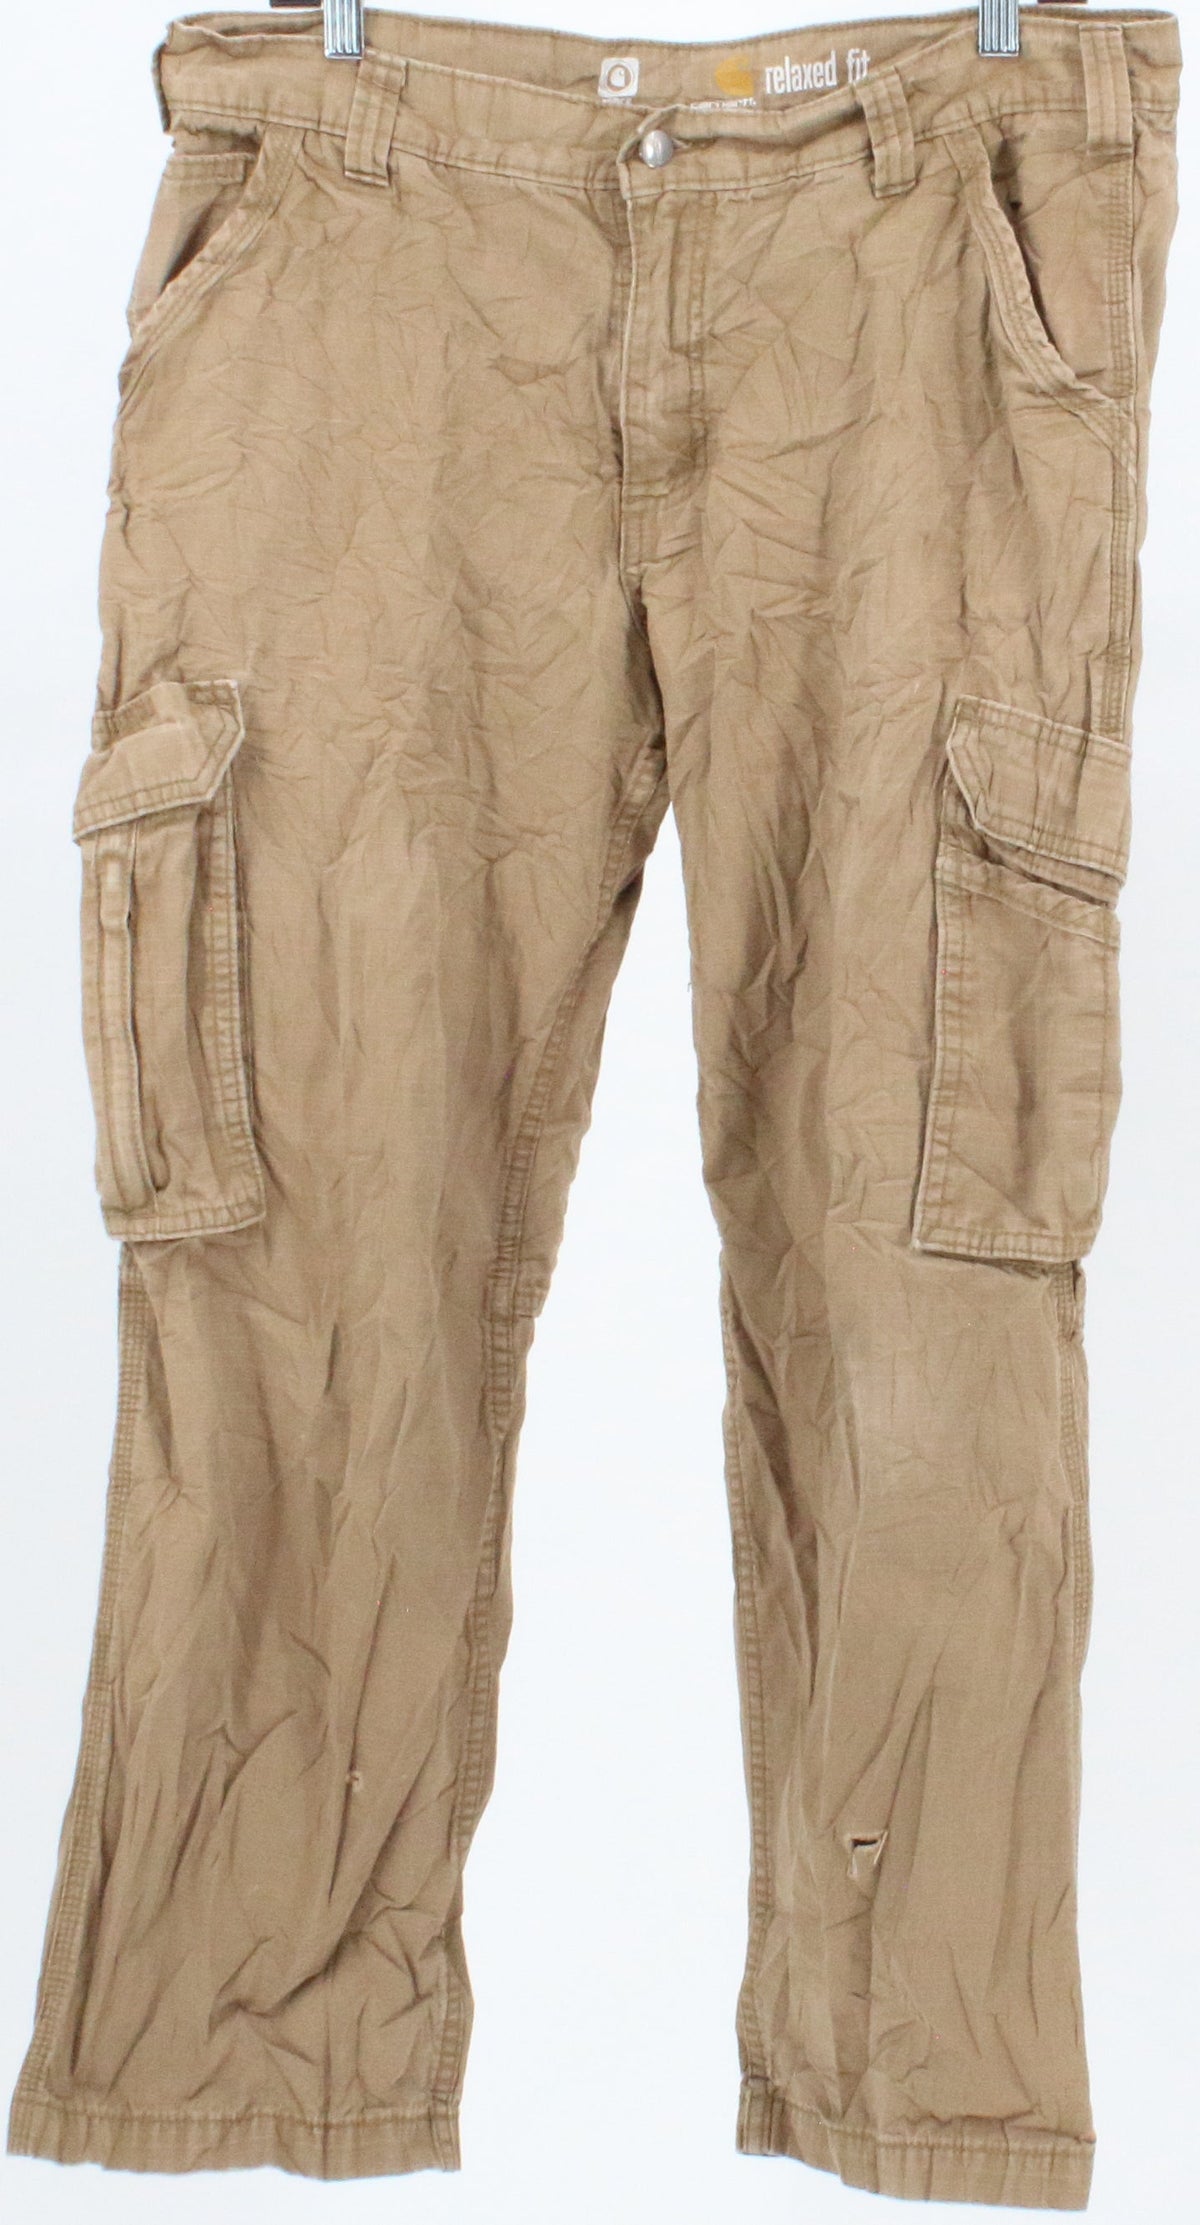 Carhartt Relaxed Fit Force Tan Cargo Pants